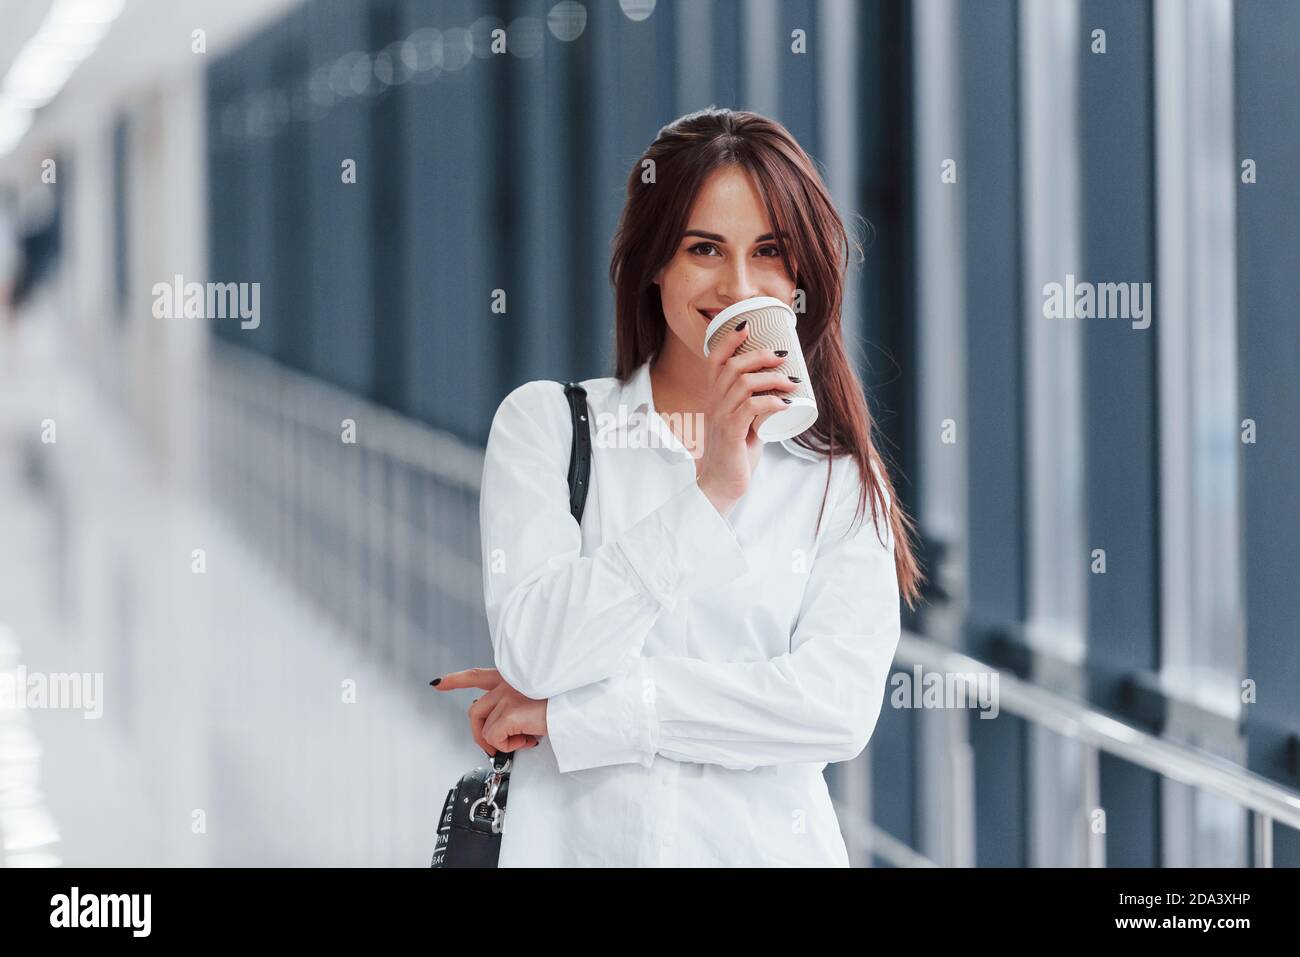 Brunette in white shirt indoors in modern airport or hallway at daytime and holding cup of drink Stock Photo